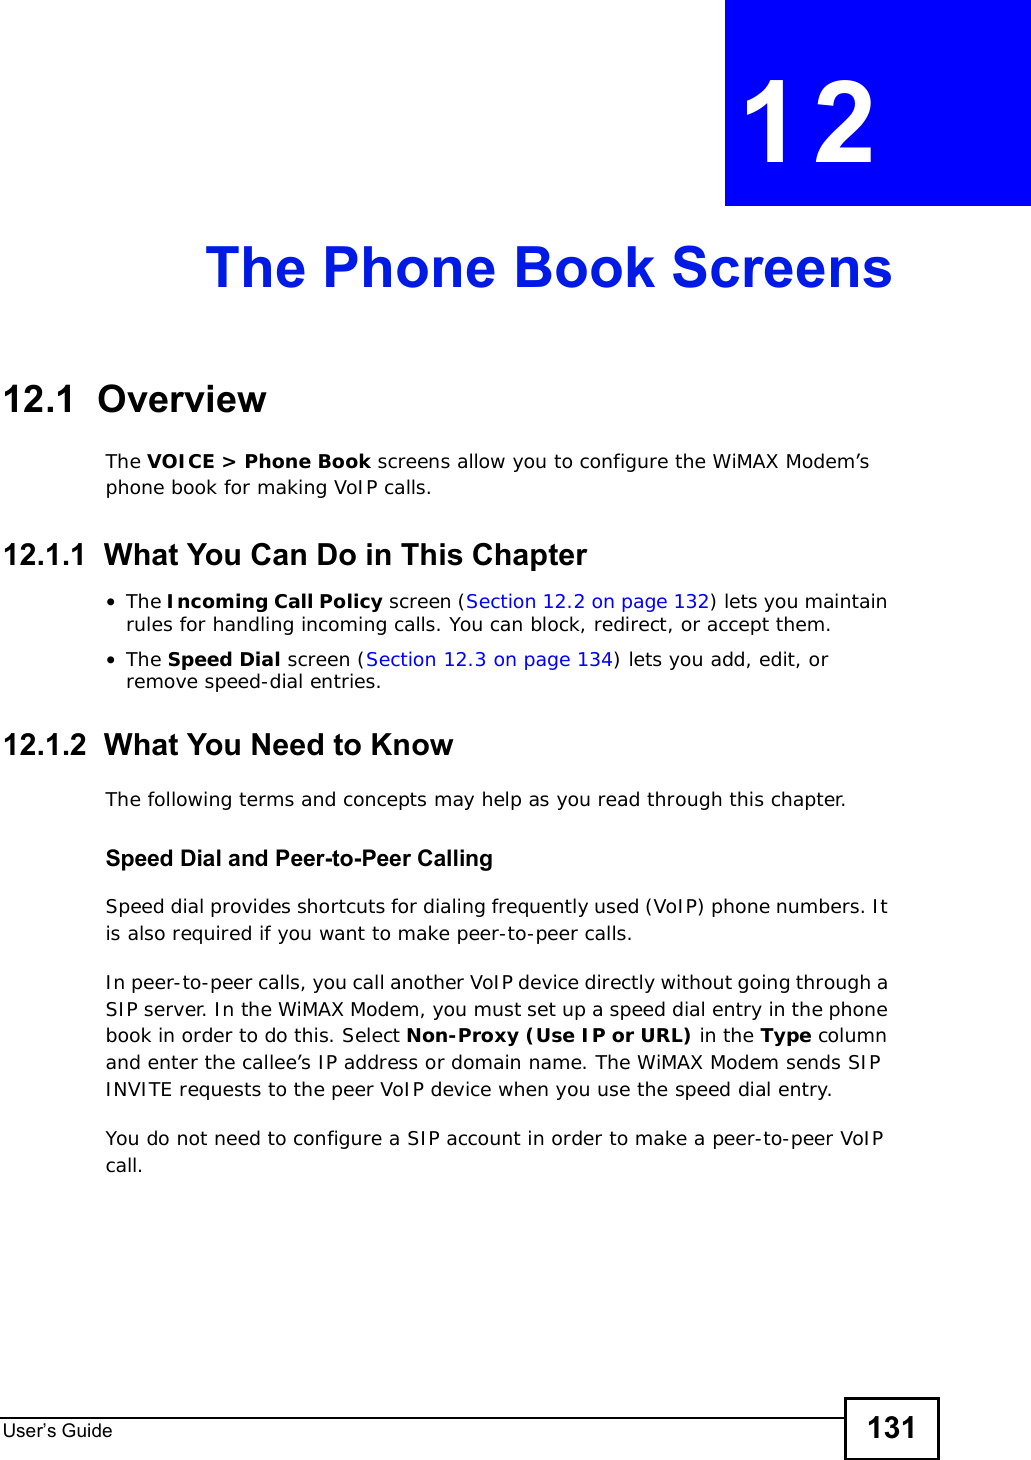 User s Guide 131CHAPTER 12The Phone Book Screens12.1  OverviewThe VOICE &gt; Phone Book screens allow you to configure the WiMAX Modem’s phone book for making VoIP calls.12.1.1  What You Can Do in This Chapter•The Incoming Call Policy screen (Section 12.2 on page 132) lets you maintain rules for handling incoming calls. You can block, redirect, or accept them.•The Speed Dial screen (Section 12.3 on page 134) lets you add, edit, or remove speed-dial entries.12.1.2  What You Need to KnowThe following terms and concepts may help as you read through this chapter.Speed Dial and Peer-to-Peer CallingSpeed dial provides shortcuts for dialing frequently used (VoIP) phone numbers. It is also required if you want to make peer-to-peer calls. In peer-to-peer calls, you call another VoIP device directly without going through a SIP server. In the WiMAX Modem, you must set up a speed dial entry in the phone book in order to do this. Select Non-Proxy (Use IP or URL) in the Type column and enter the callee’s IP address or domain name. The WiMAX Modem sends SIP INVITE requests to the peer VoIP device when you use the speed dial entry.You do not need to configure a SIP account in order to make a peer-to-peer VoIP call.